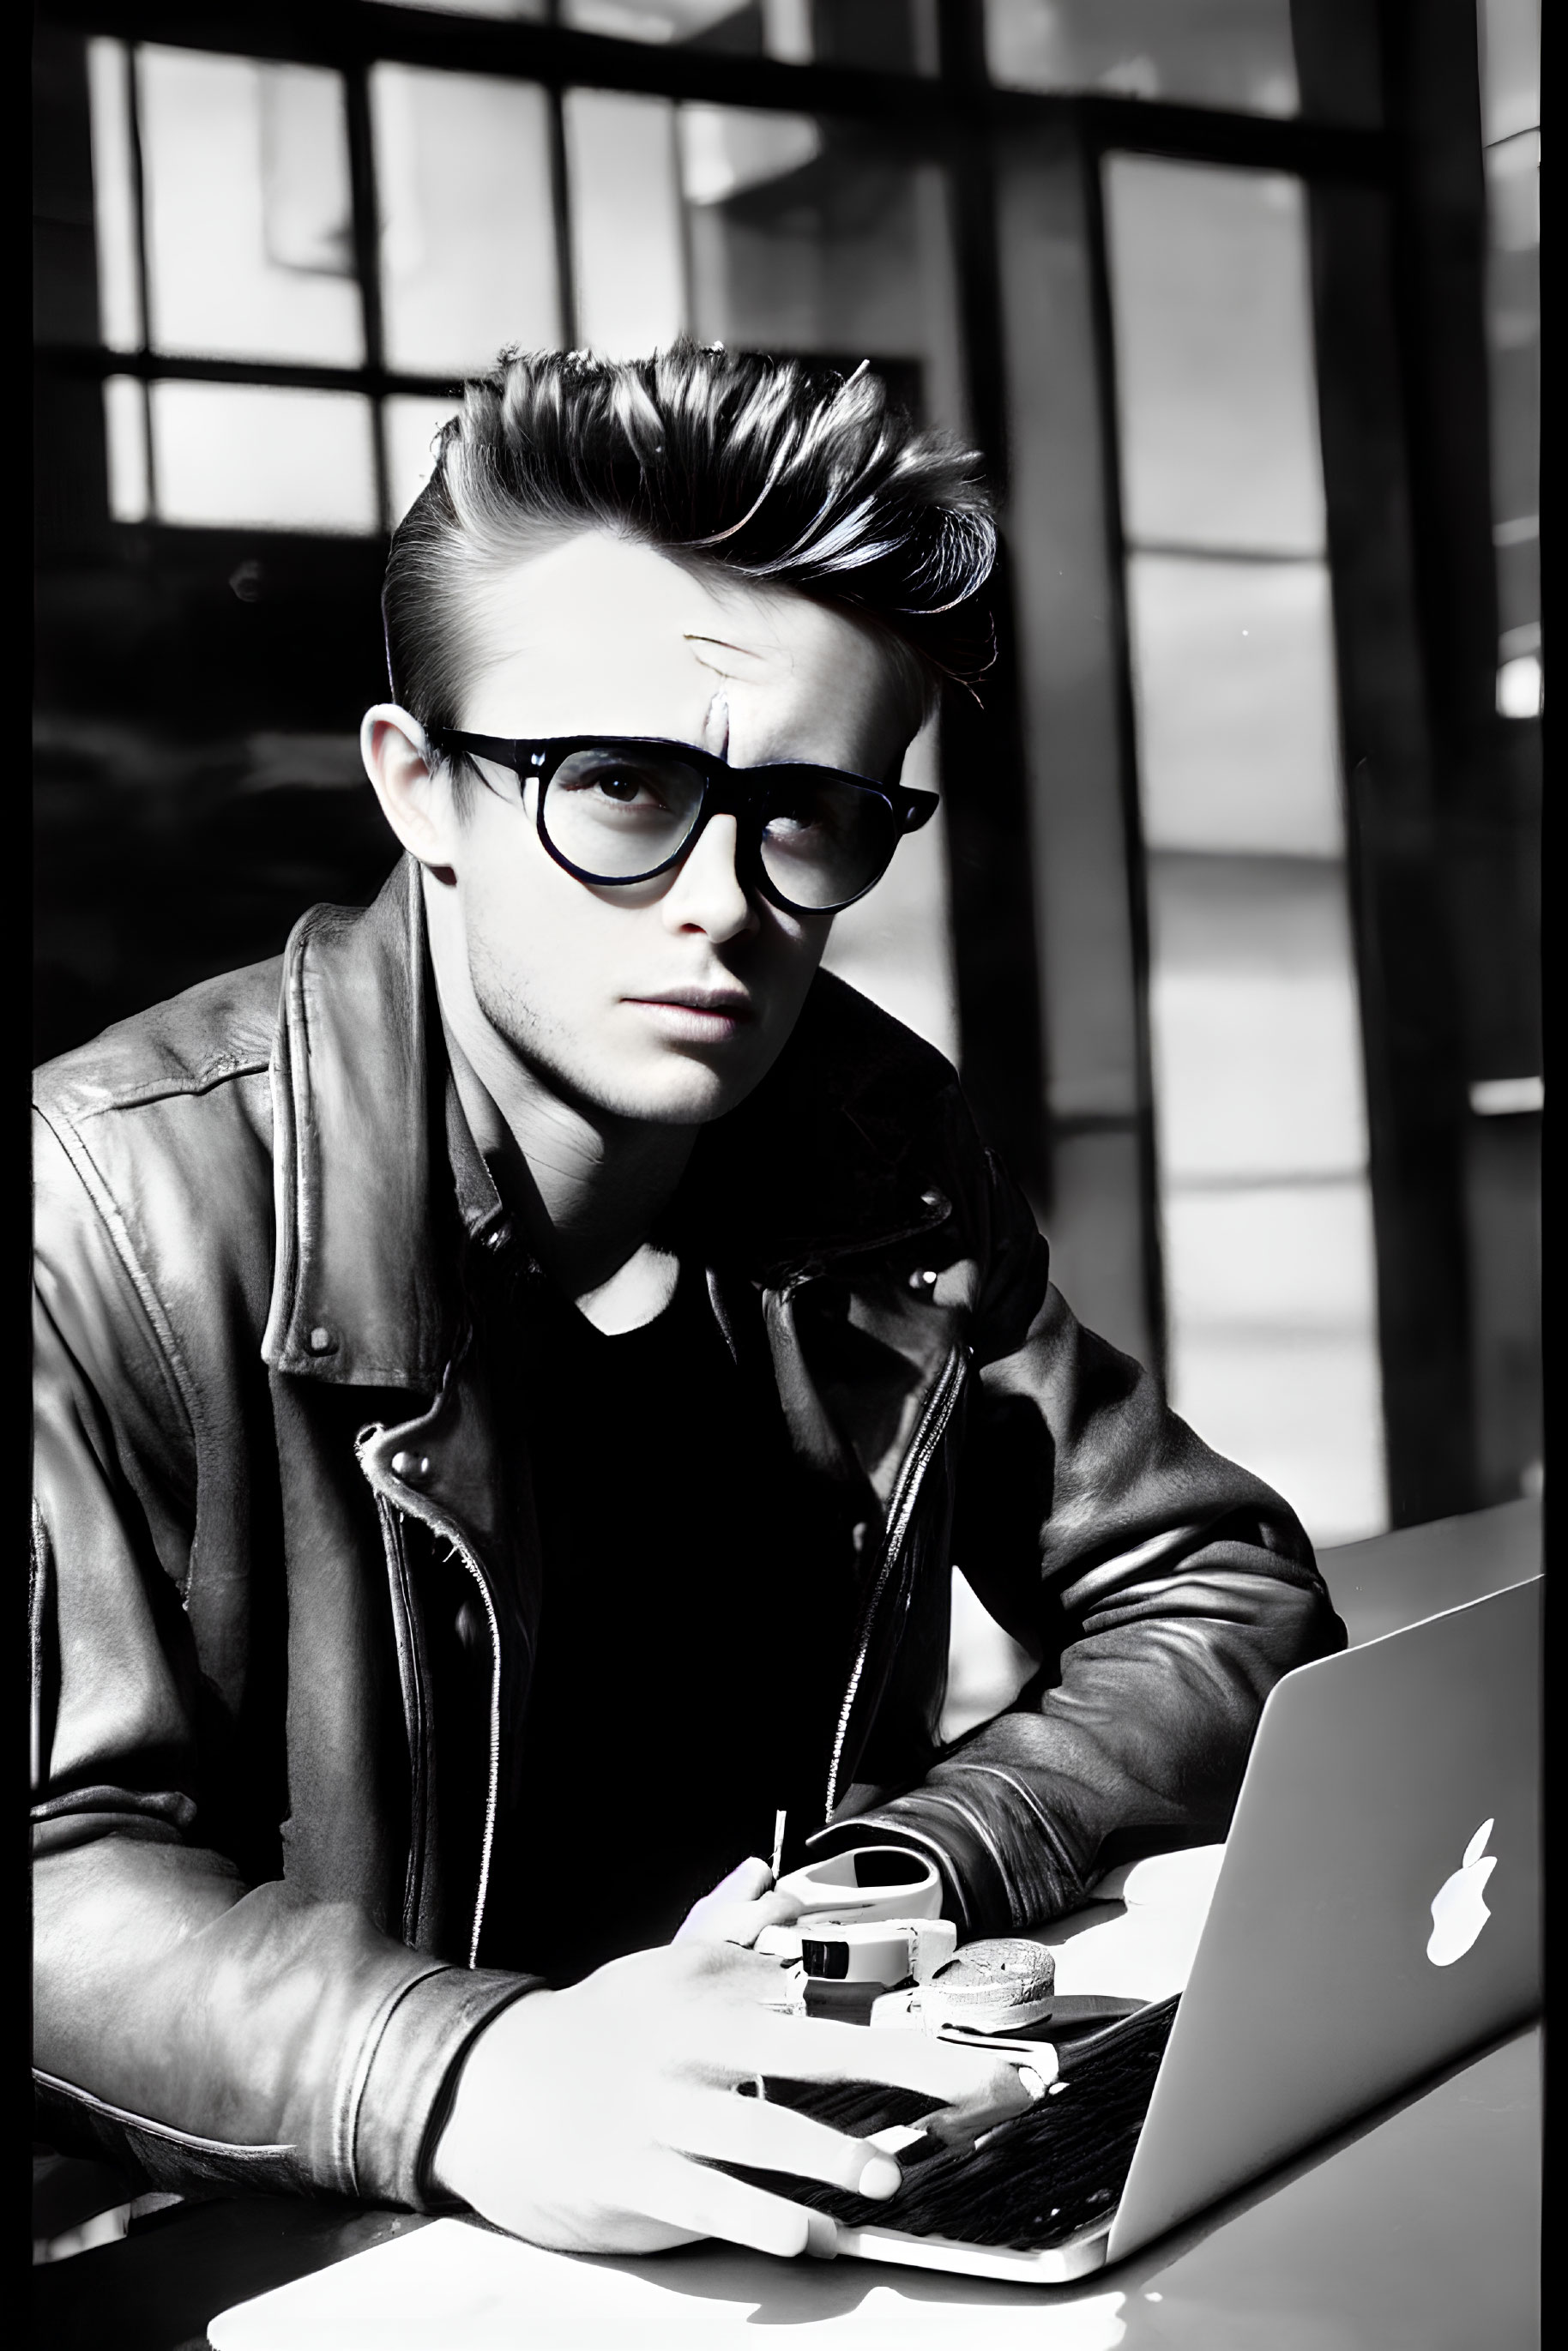 Young man with pompadour hairstyle and glasses works on laptop outdoors